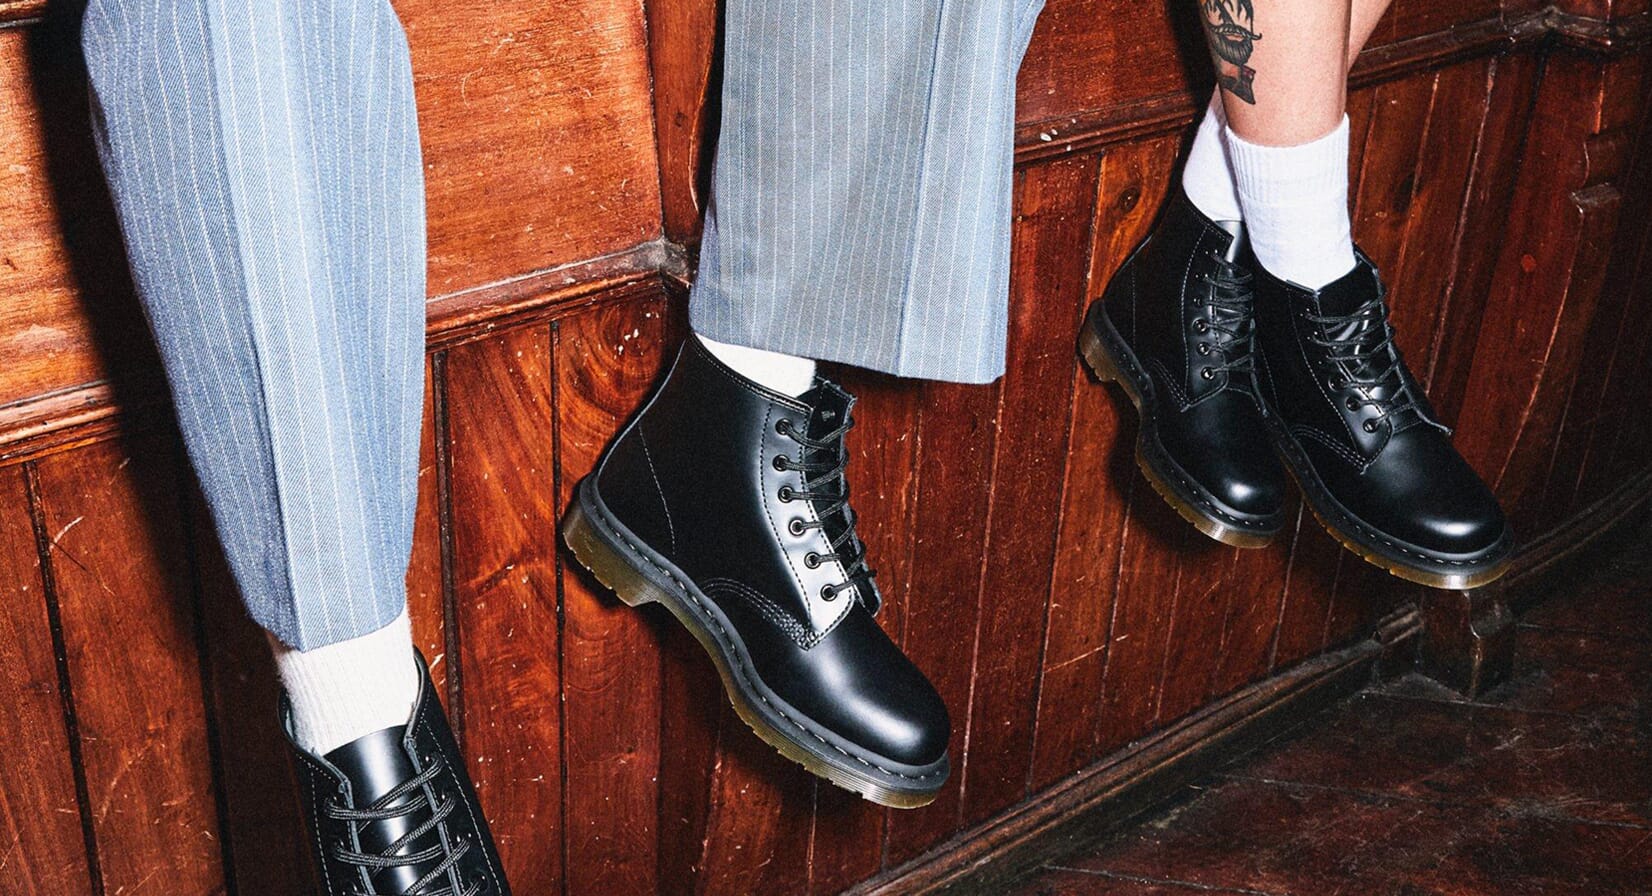 A Buyer's Guide to Dr. Martens